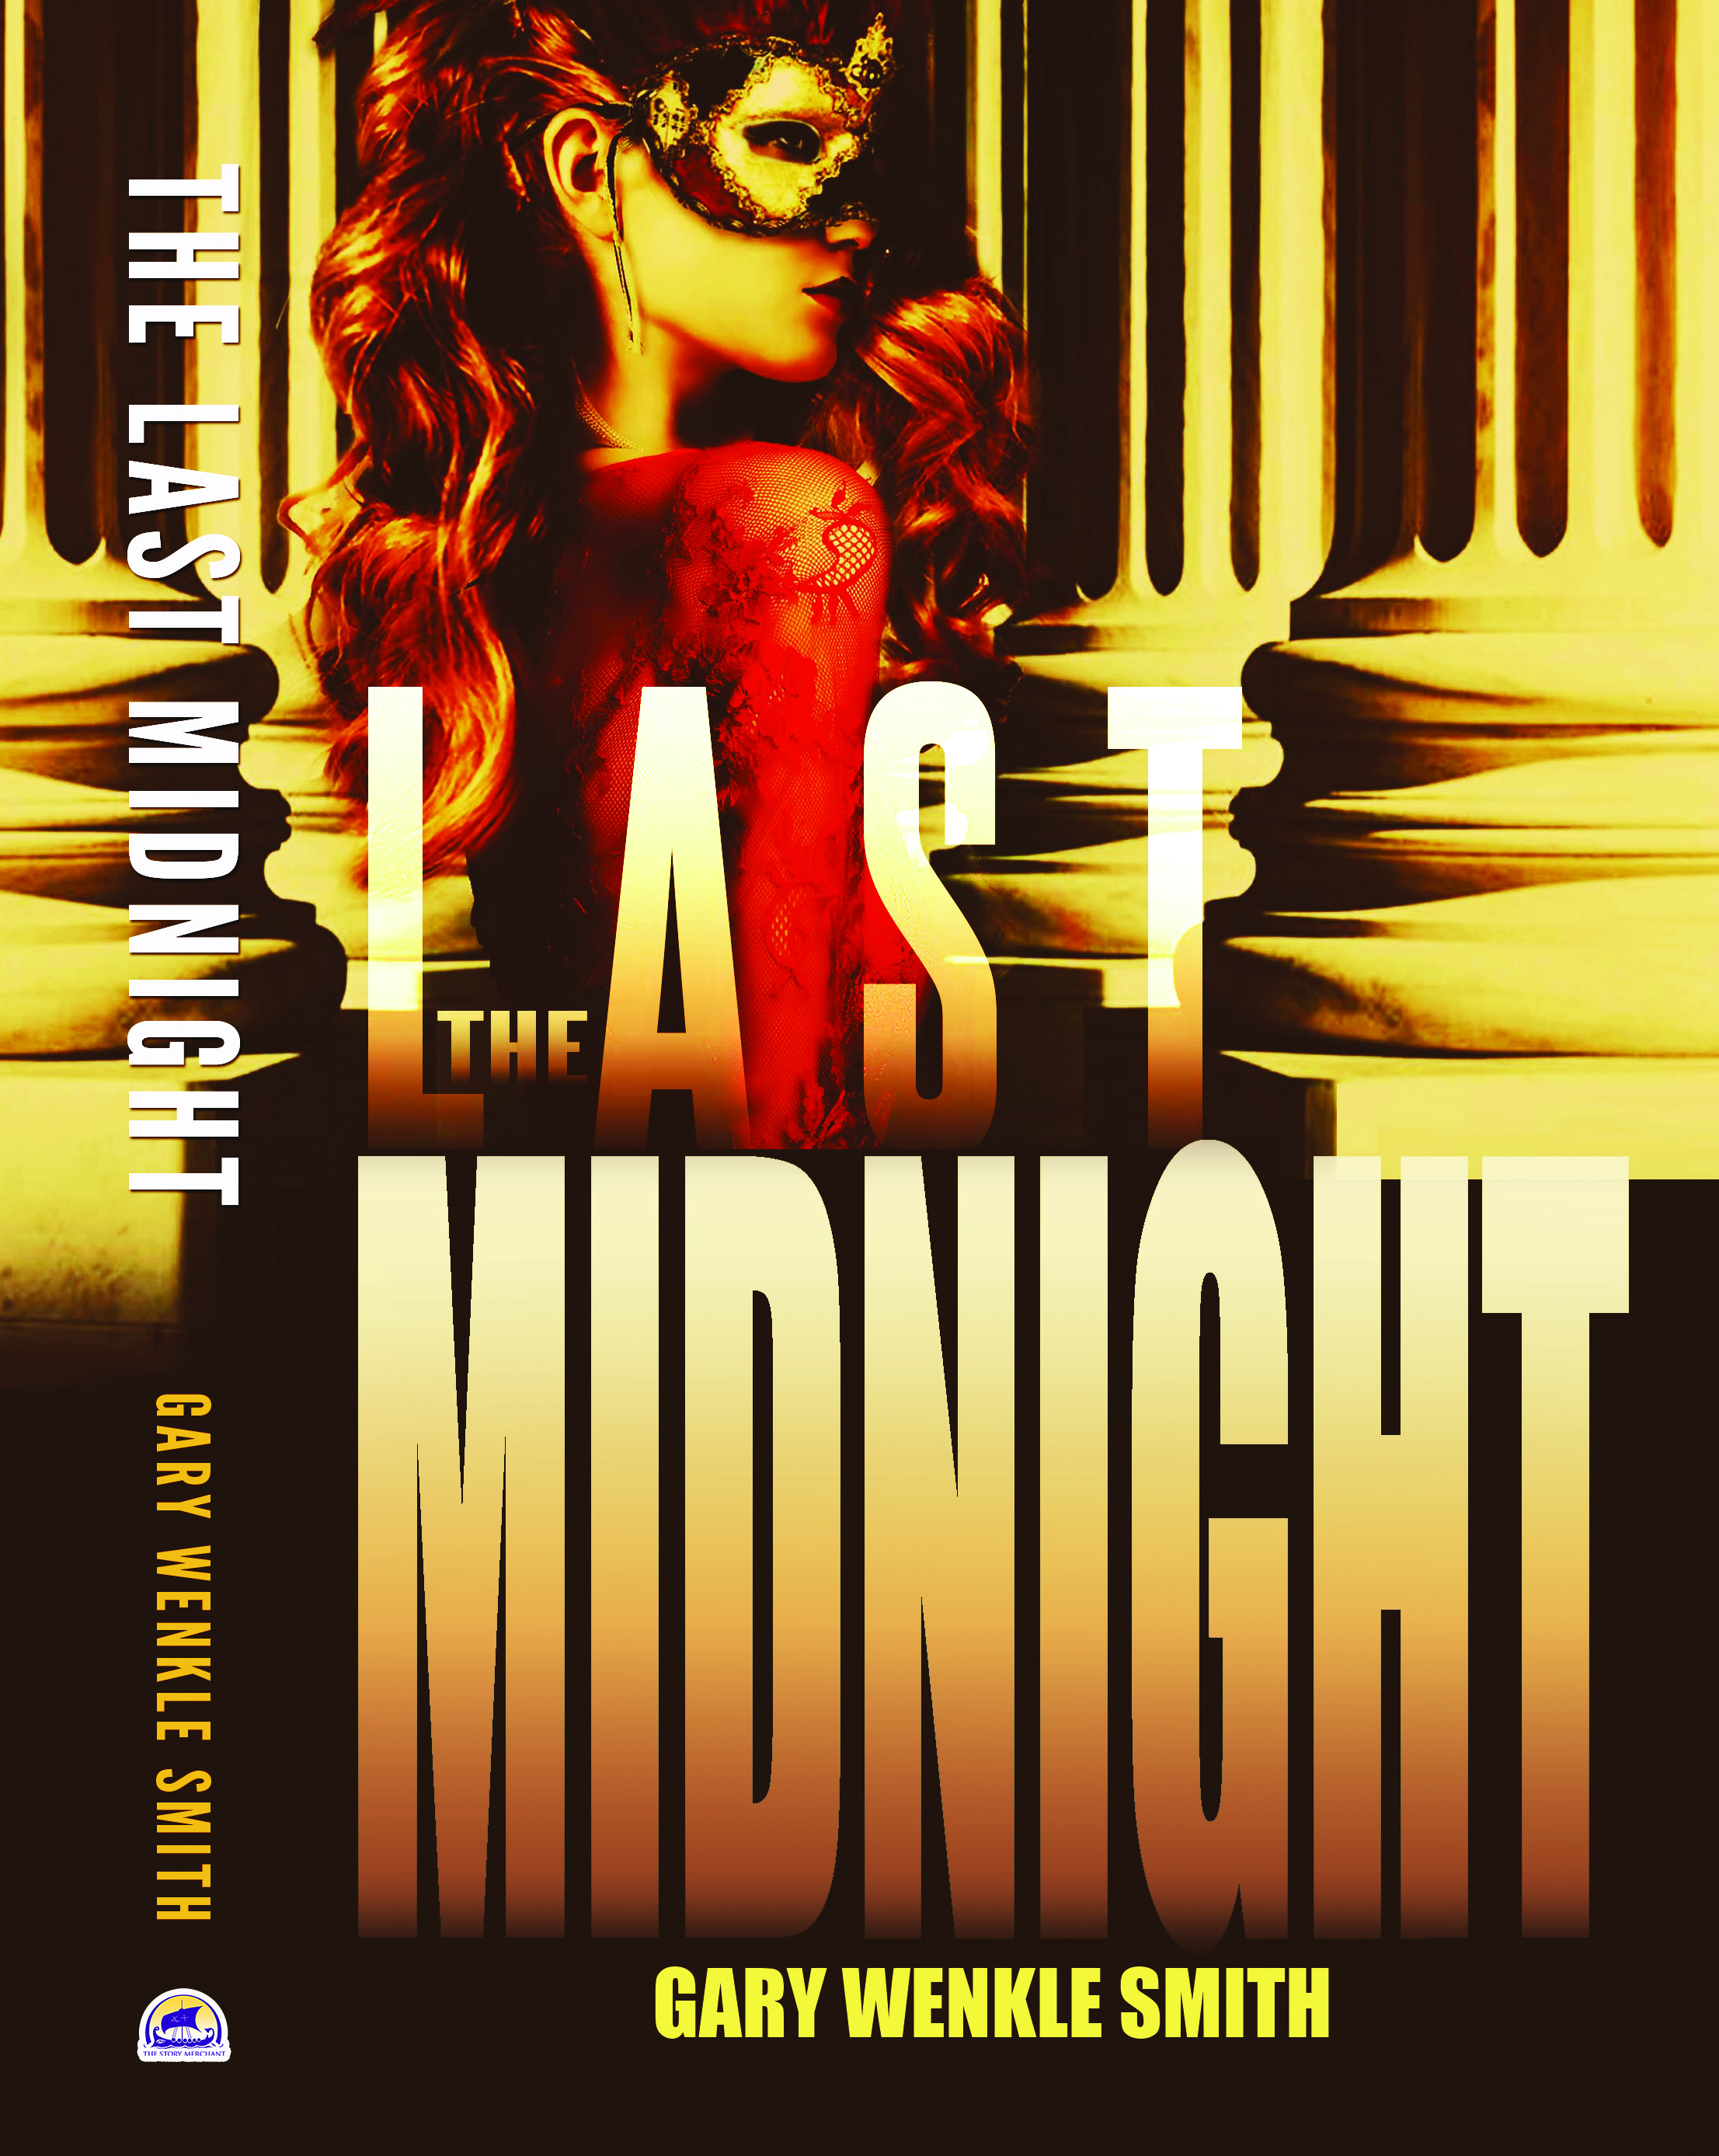 The Last Midnight by Gary Wenkle Smith